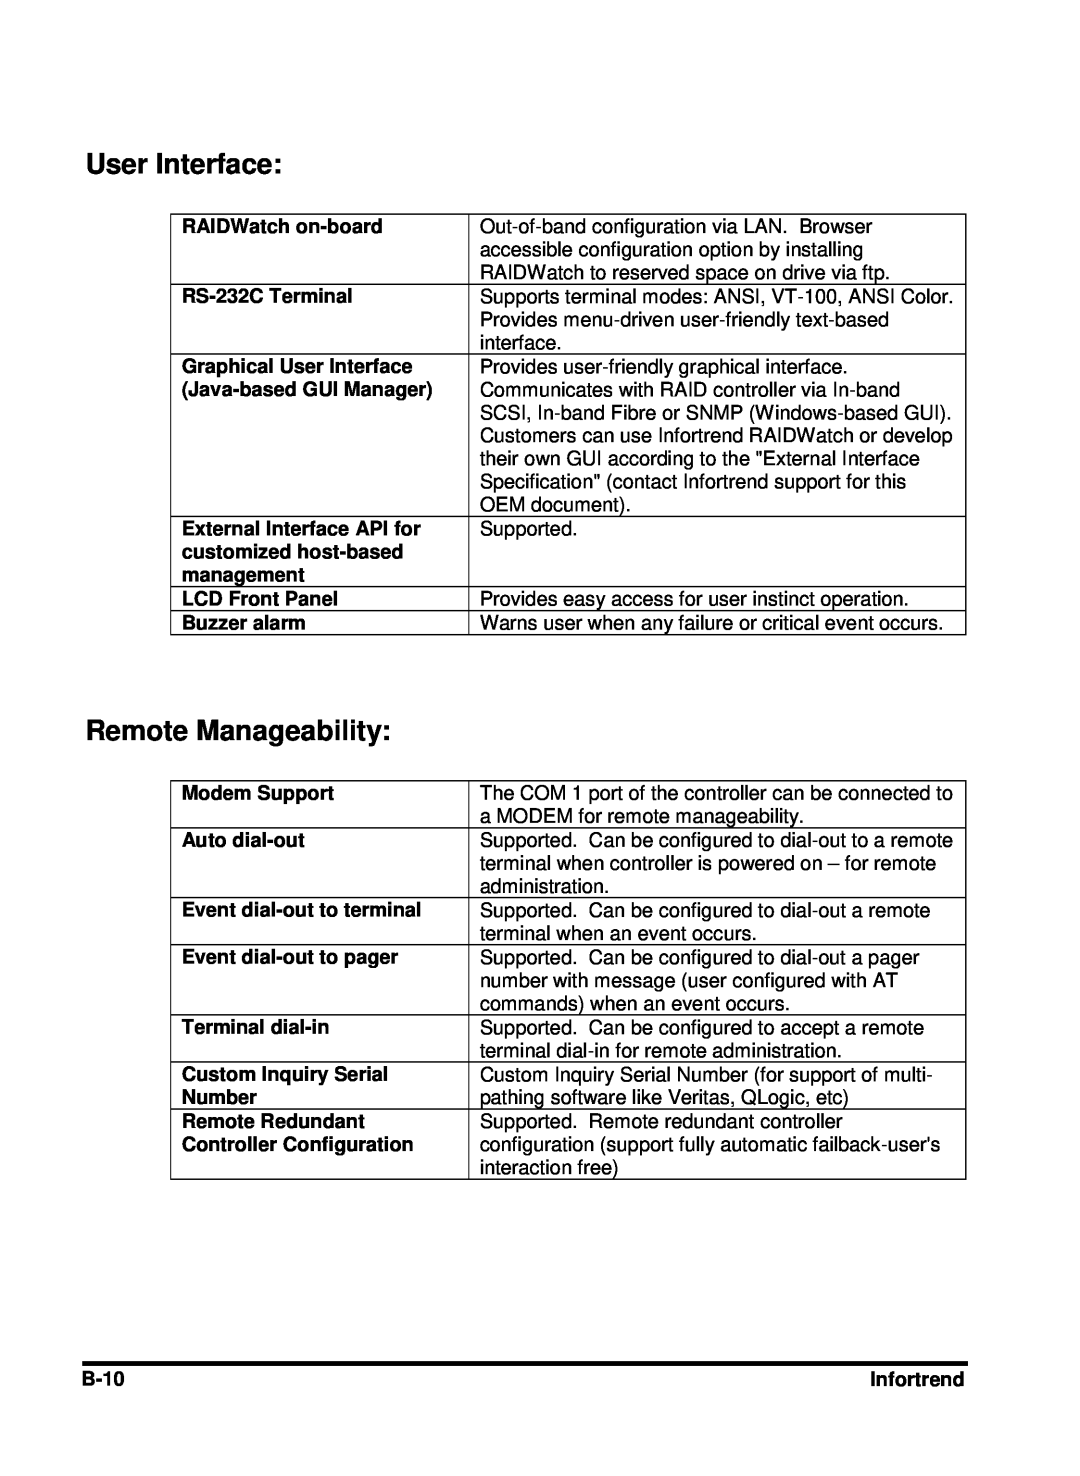 Compaq Infortrend manual User Interface, Remote Manageability 